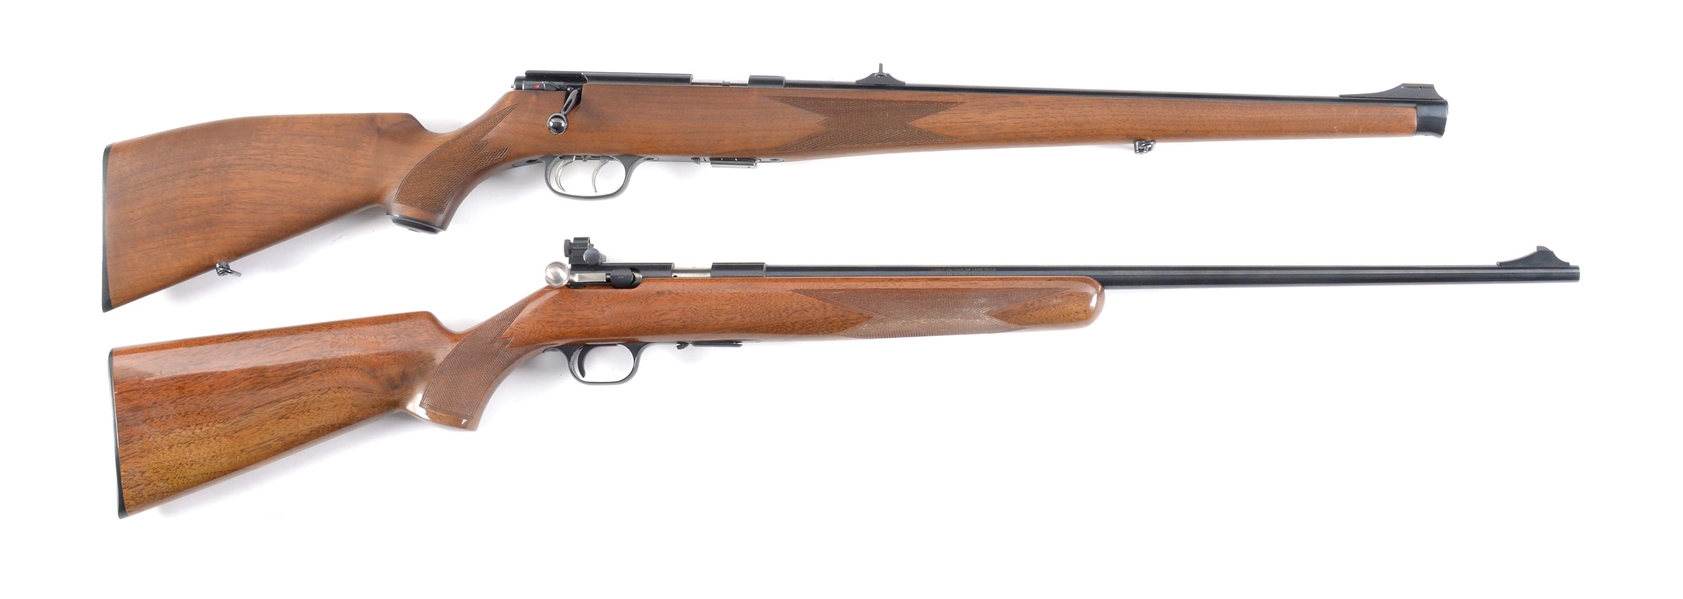 (M) LOT OF TWO: TWO .22 CALIBER BOLT ACTION RIFLES FROM KRICO AND BROWNING.